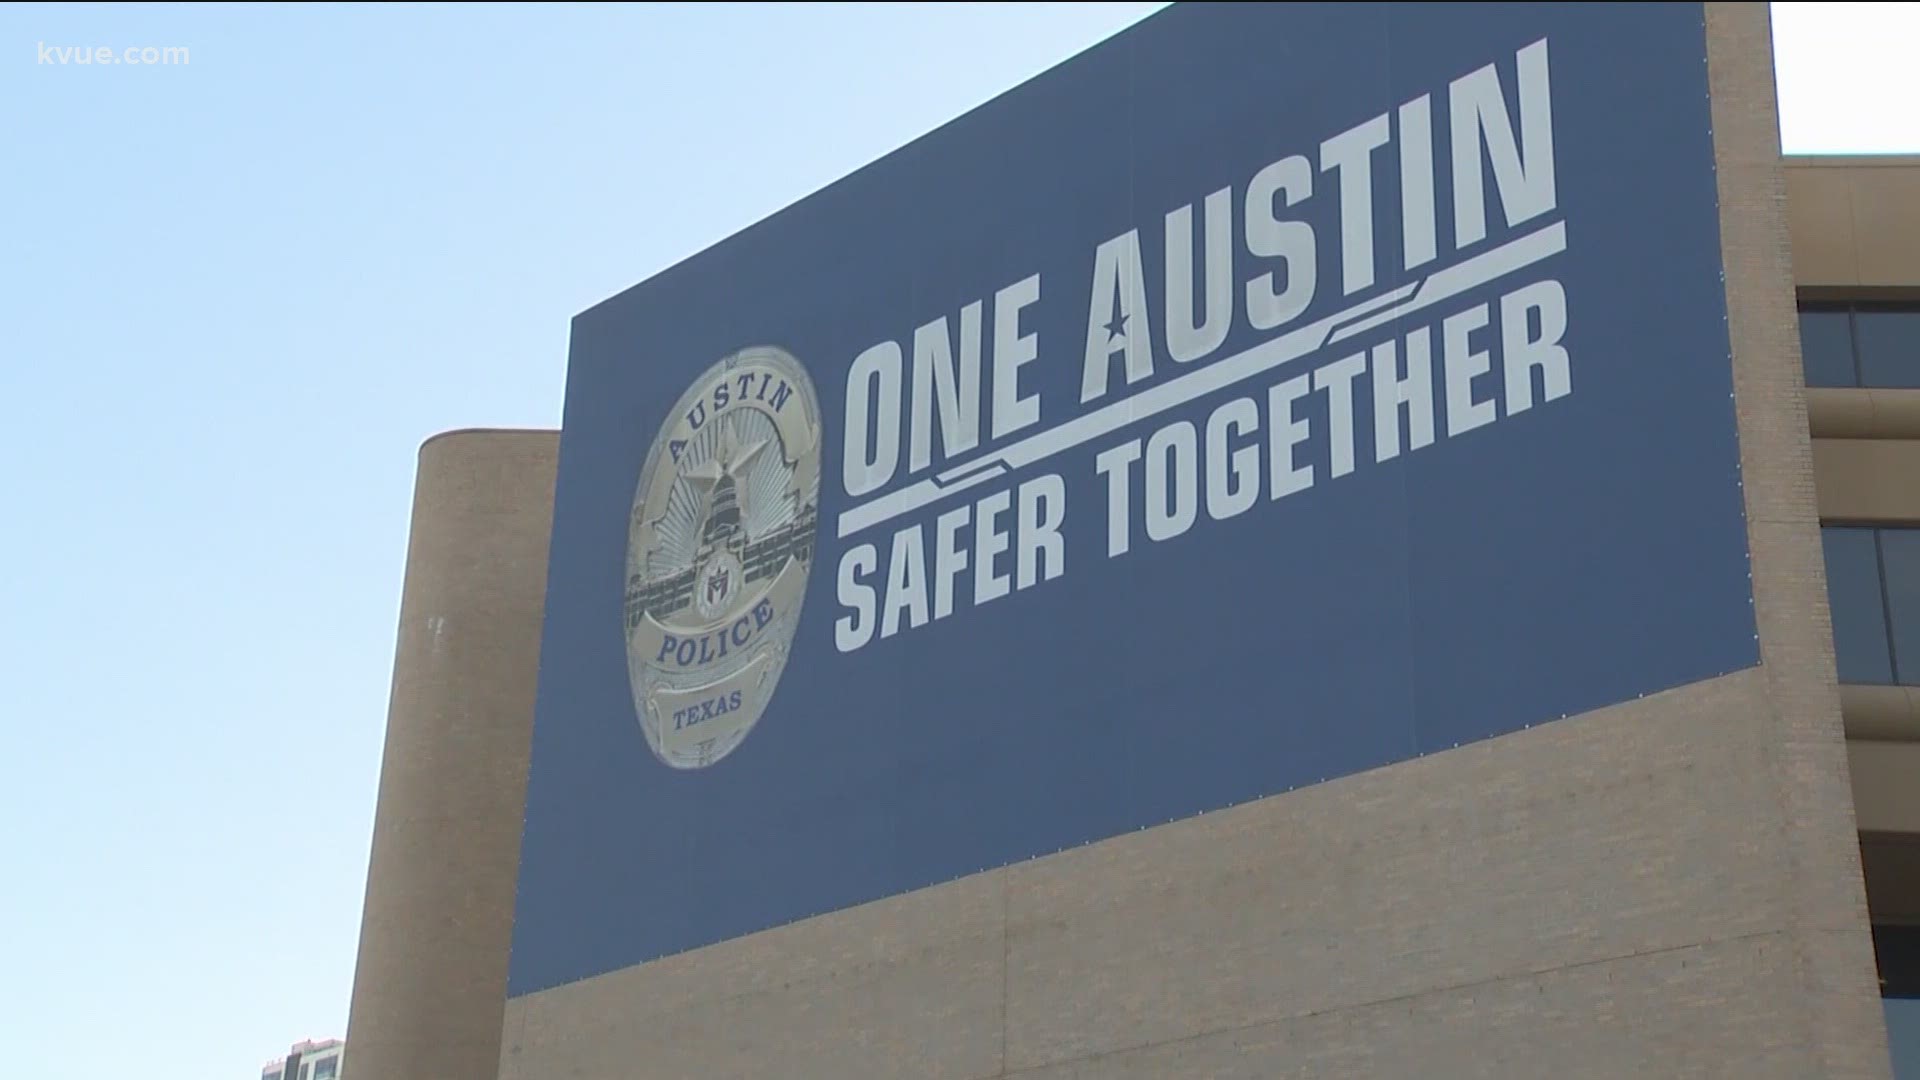 One group wants Austinites to have a say in who holds the position of police chief next.